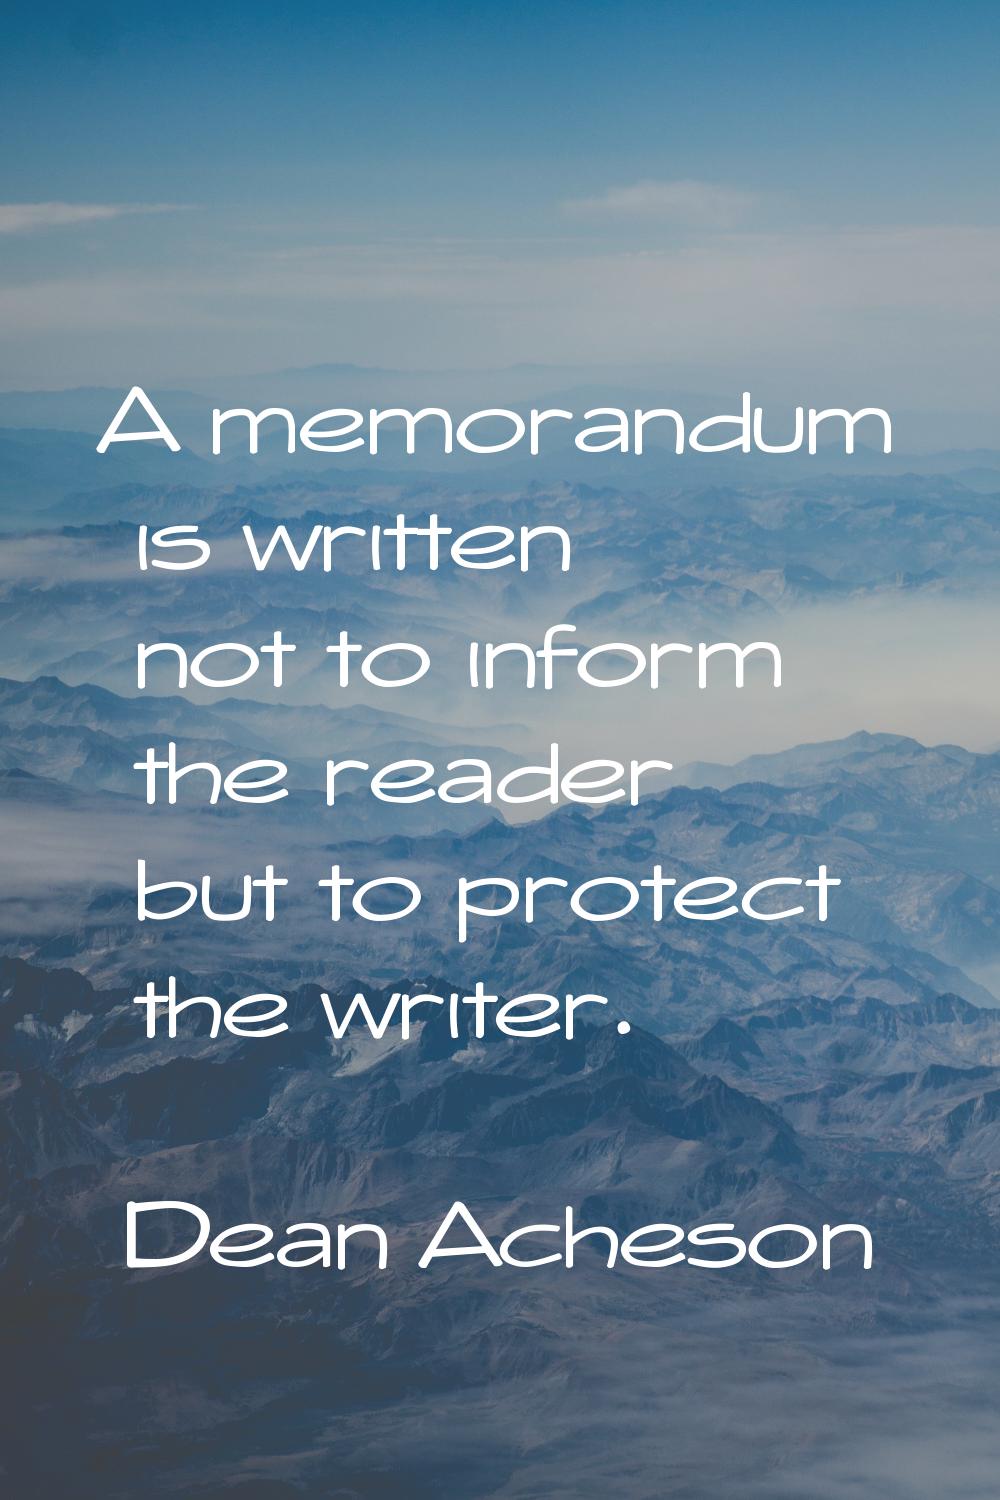 A memorandum is written not to inform the reader but to protect the writer.